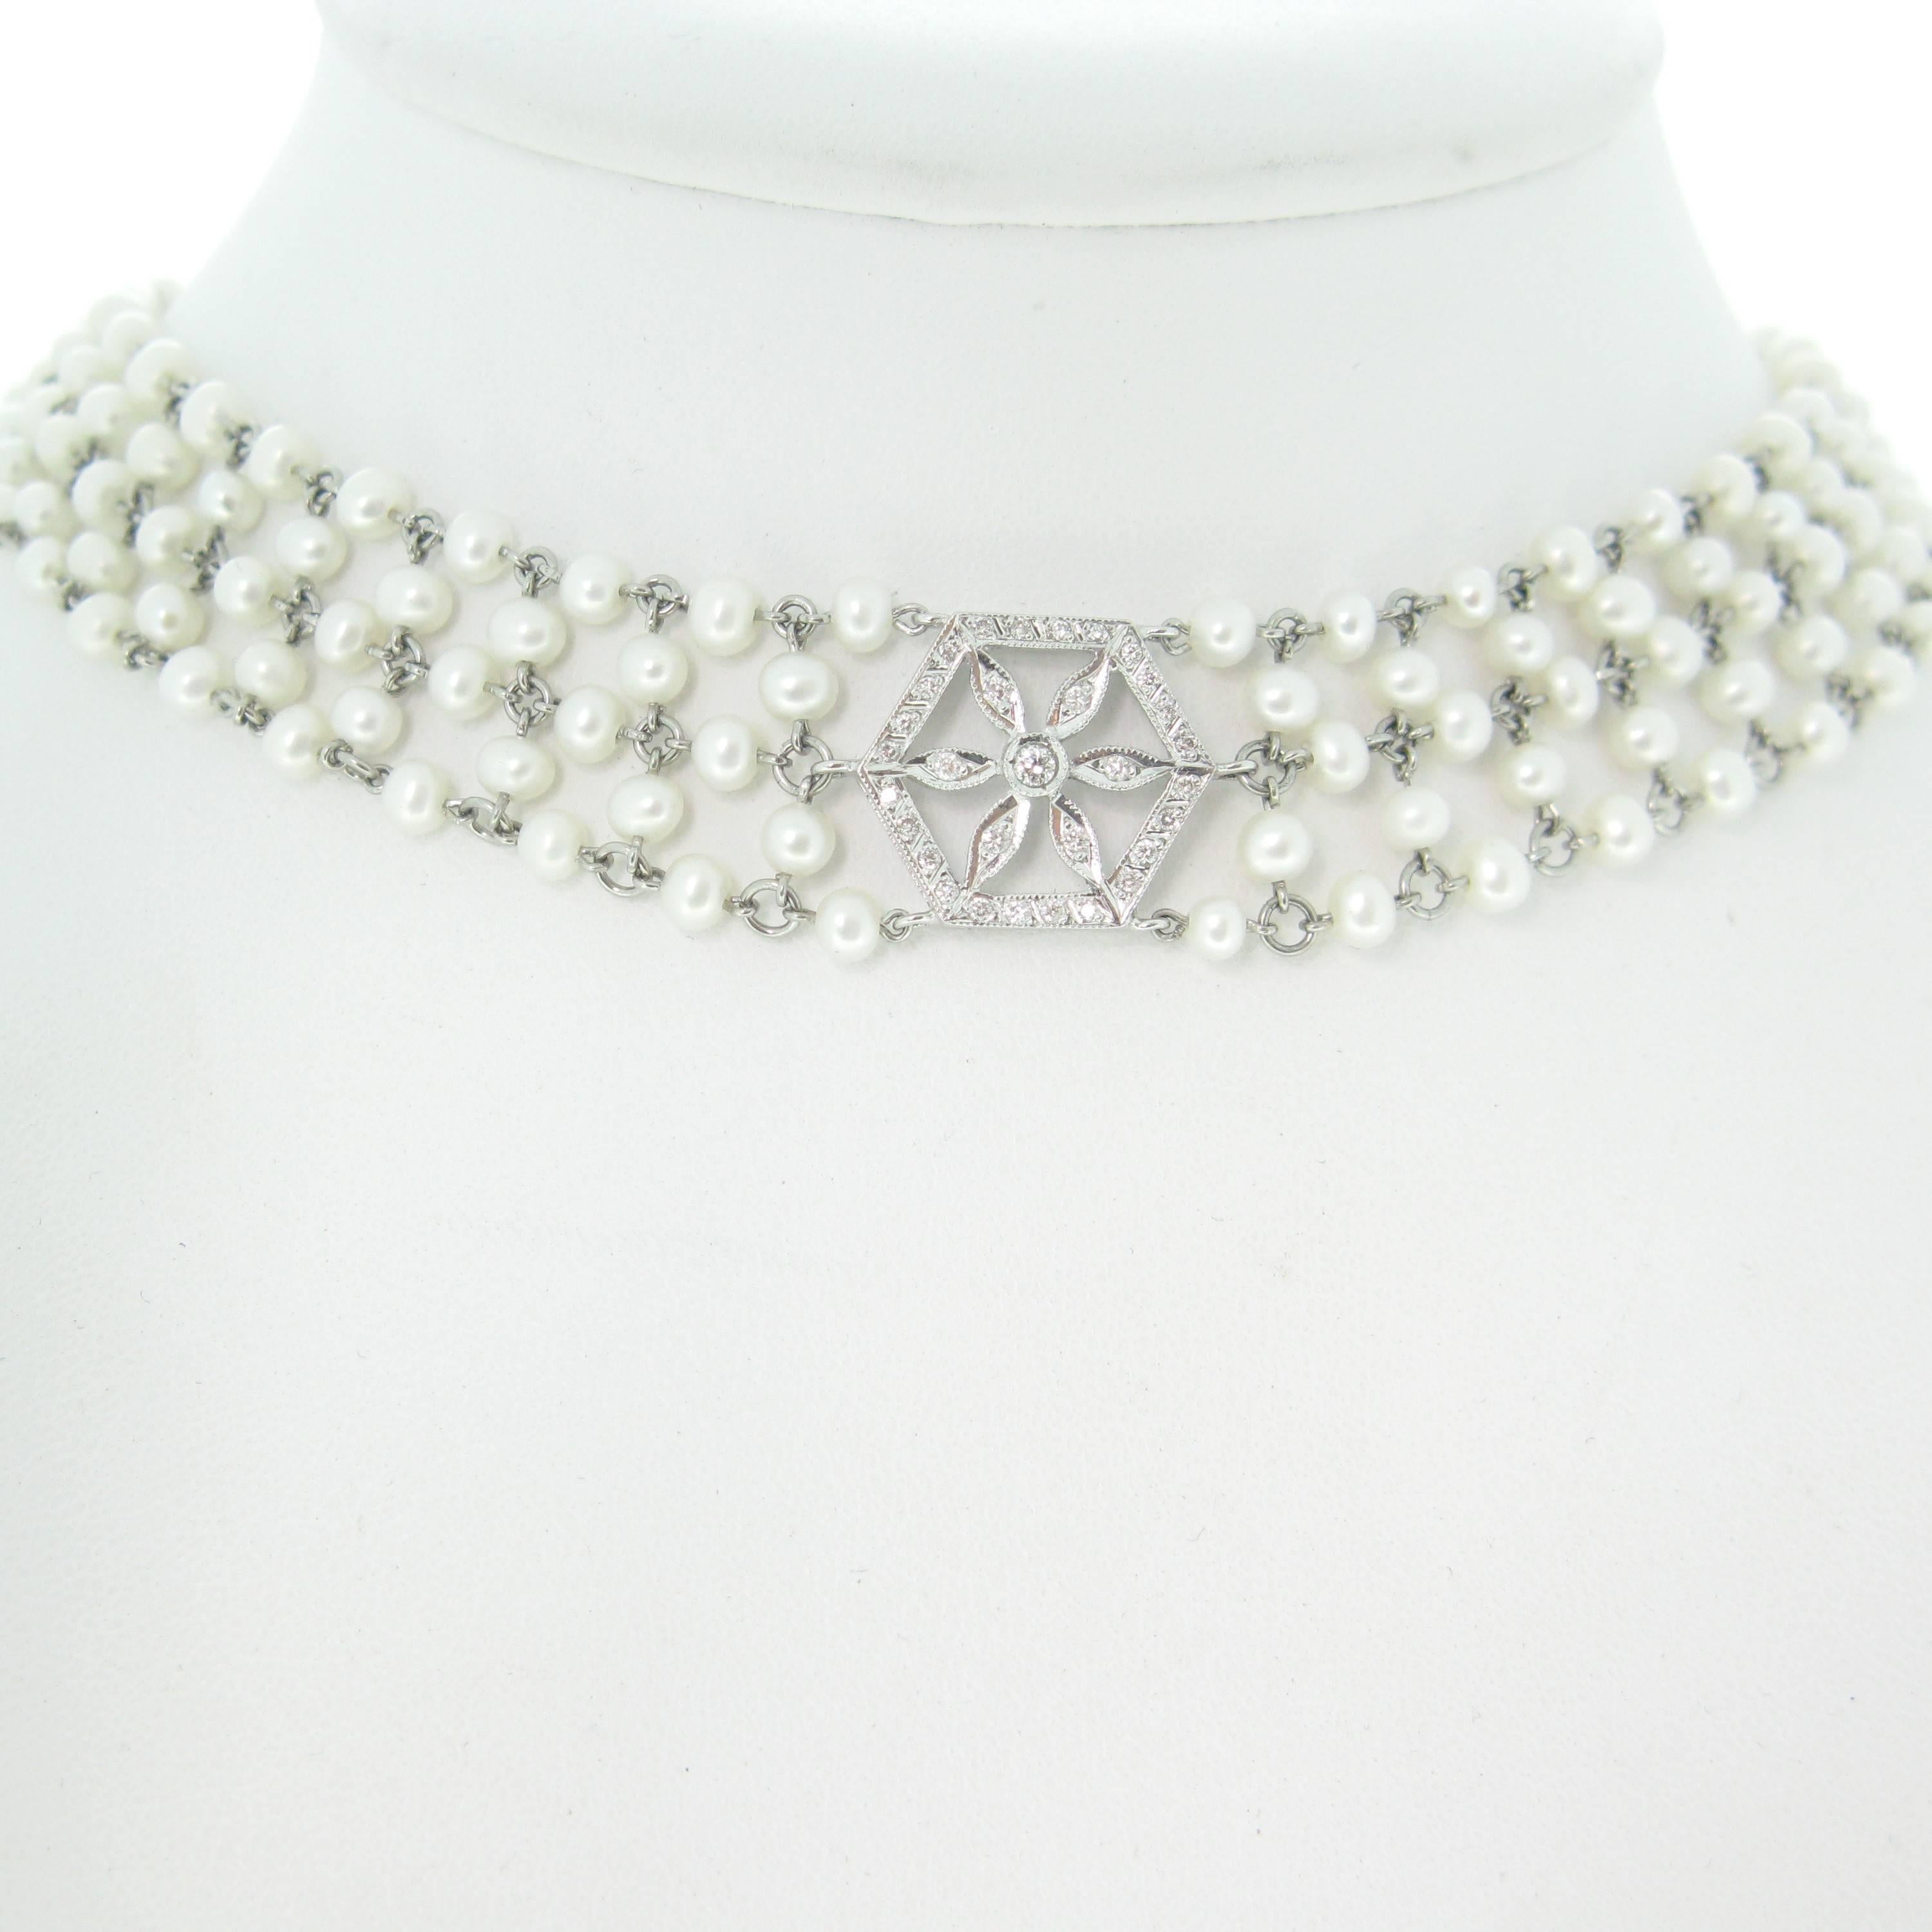 This ravishing necklace consist of five lines of cultured pearls – there are 260 pearls in total. Each pearl has a diameter of about 3.20mm. The motif in the center and the clasp are made in 18kt gold set with round brilliant cut diamonds – there